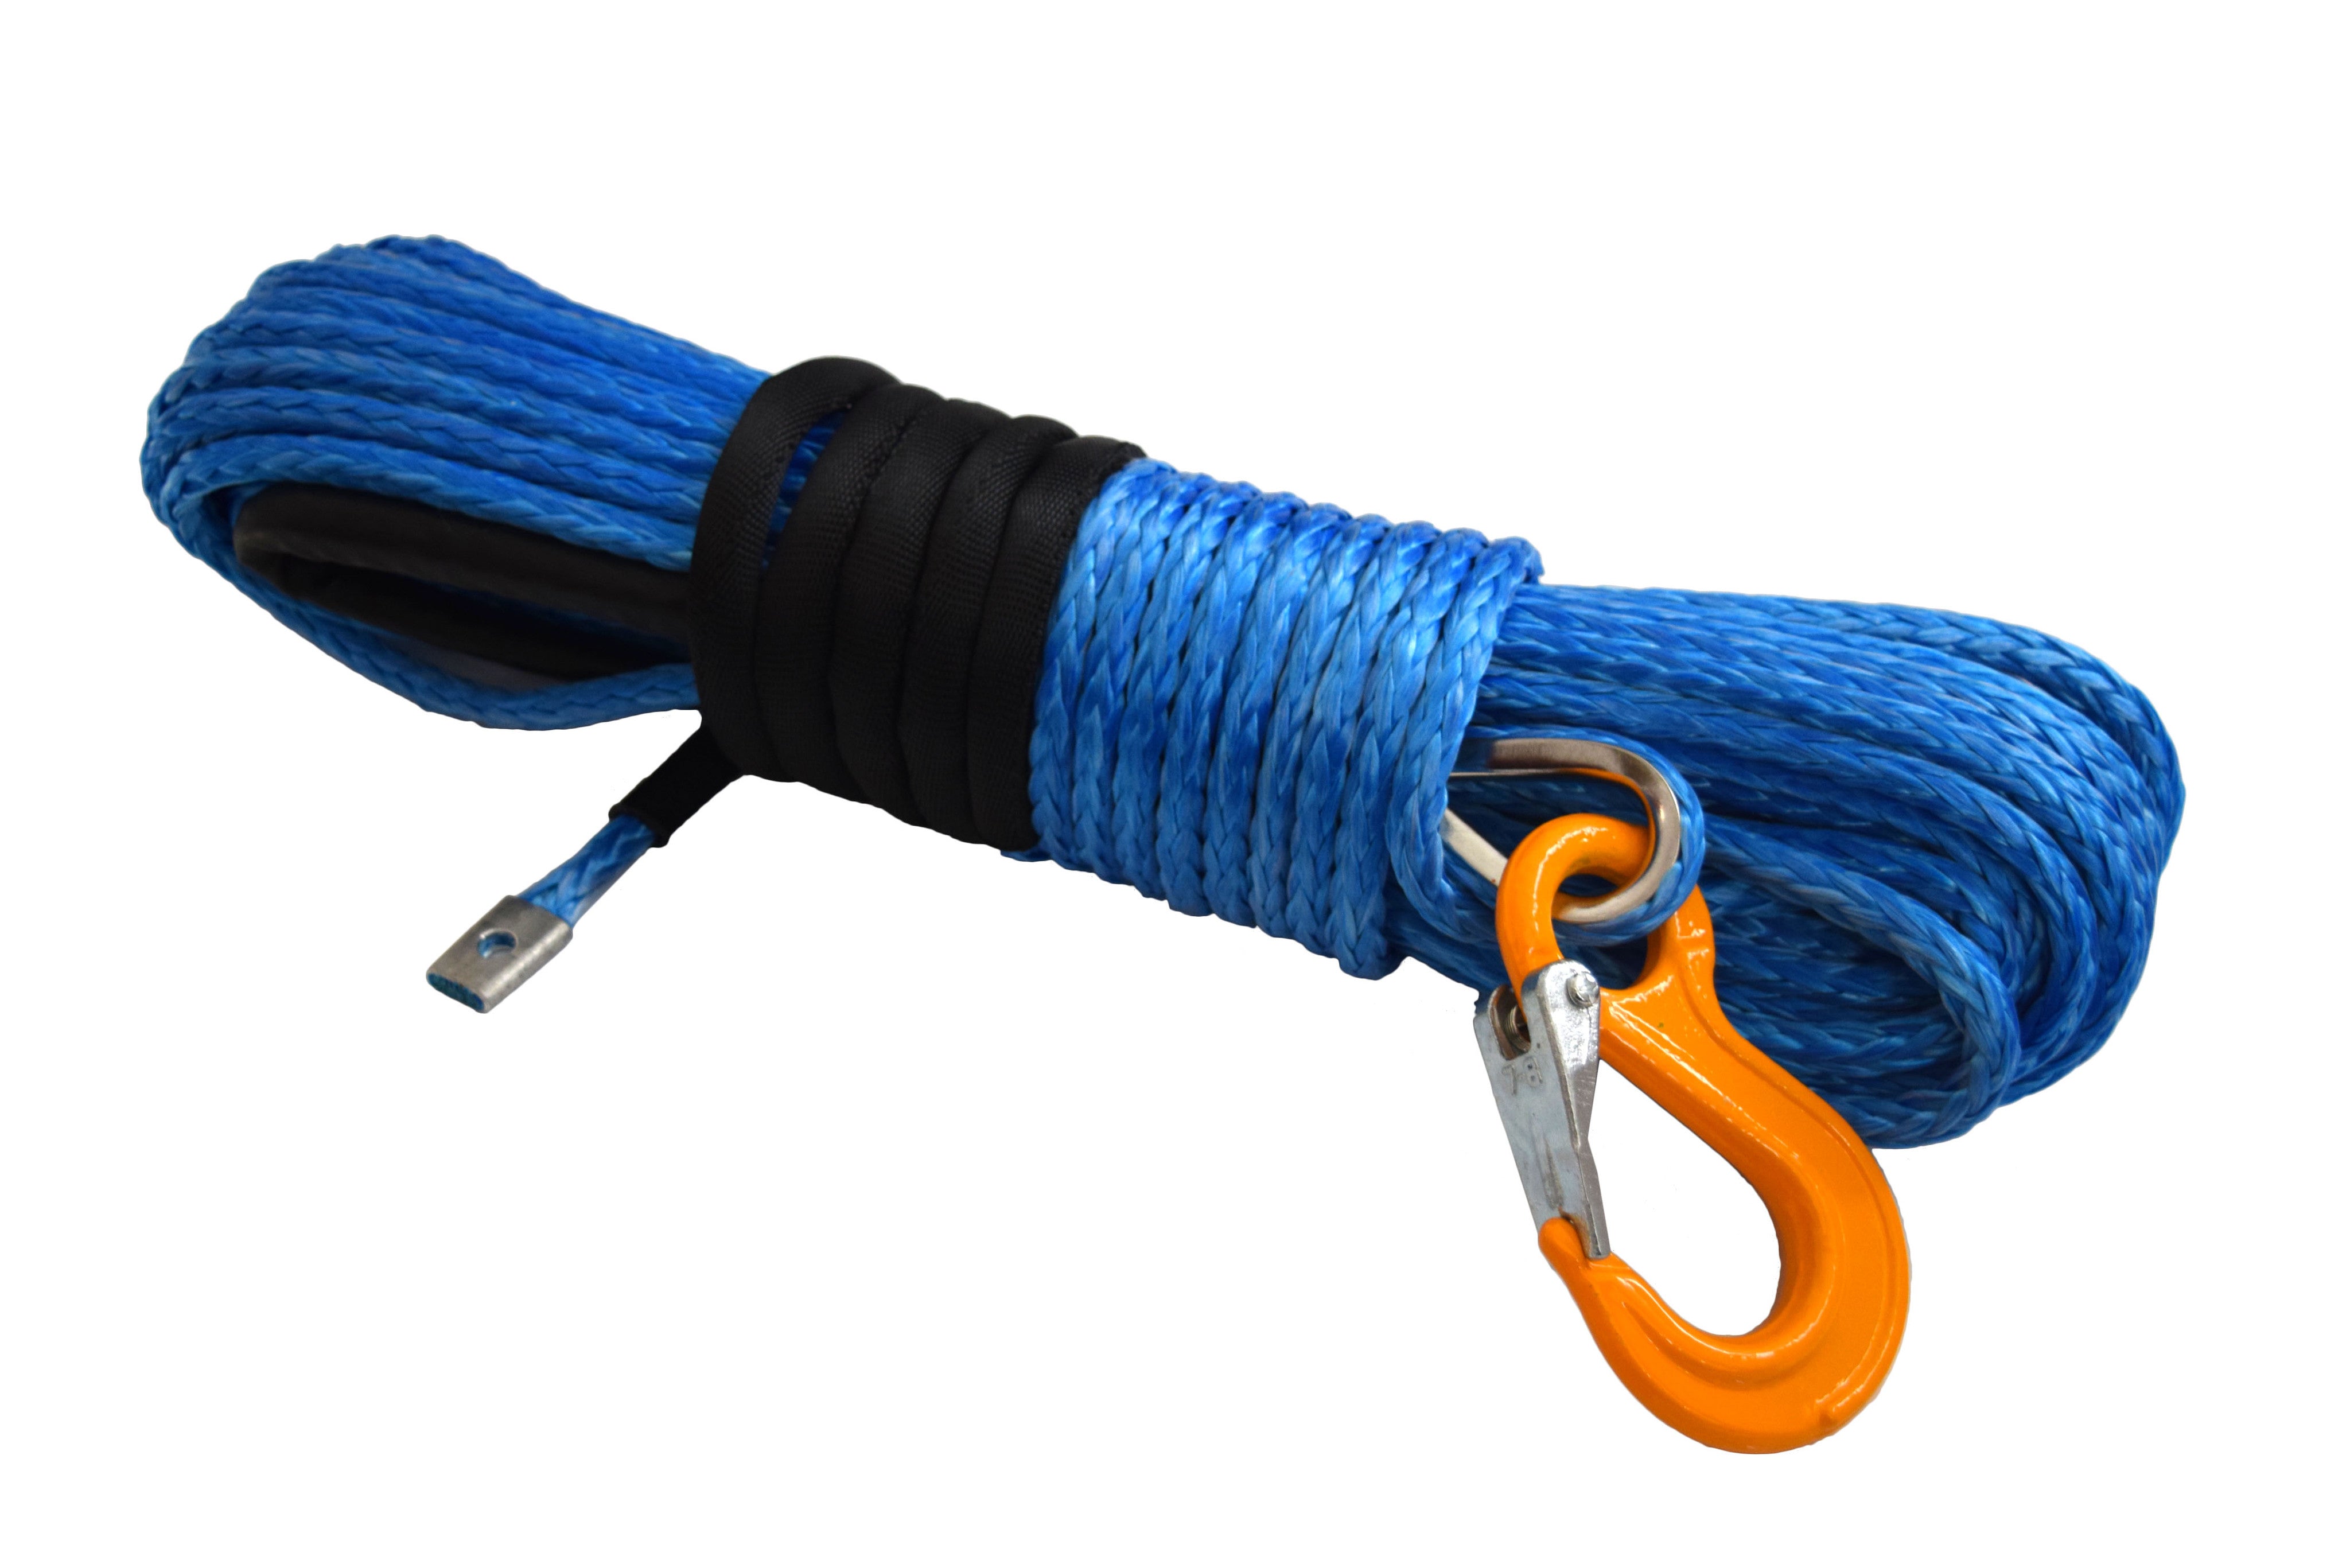 QIQU blue 100ft 5/16 inch SUV 4x4 Off-road car synthetic winch cable rope line with thimble sleeve hook and lug